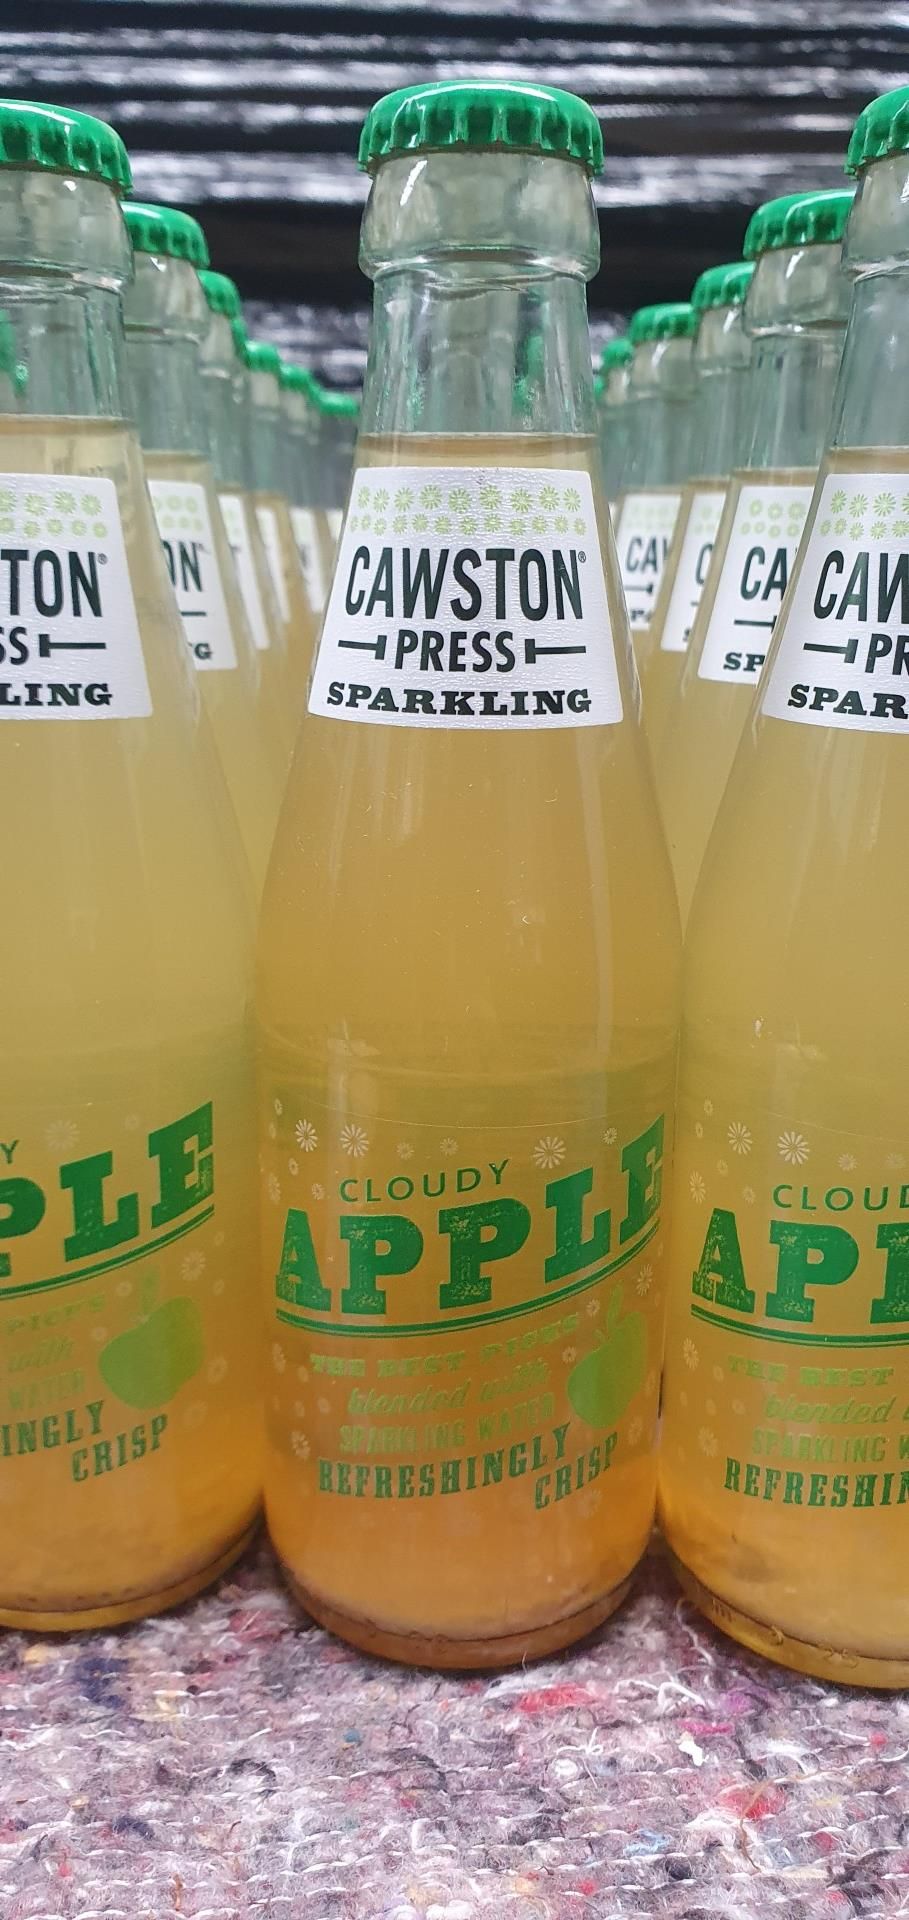 80 x Bottles of Cawston Press 250ml Sparkling Apple and Lemonade Drinks - Ref: TCH218 - CL840 - - Image 3 of 7